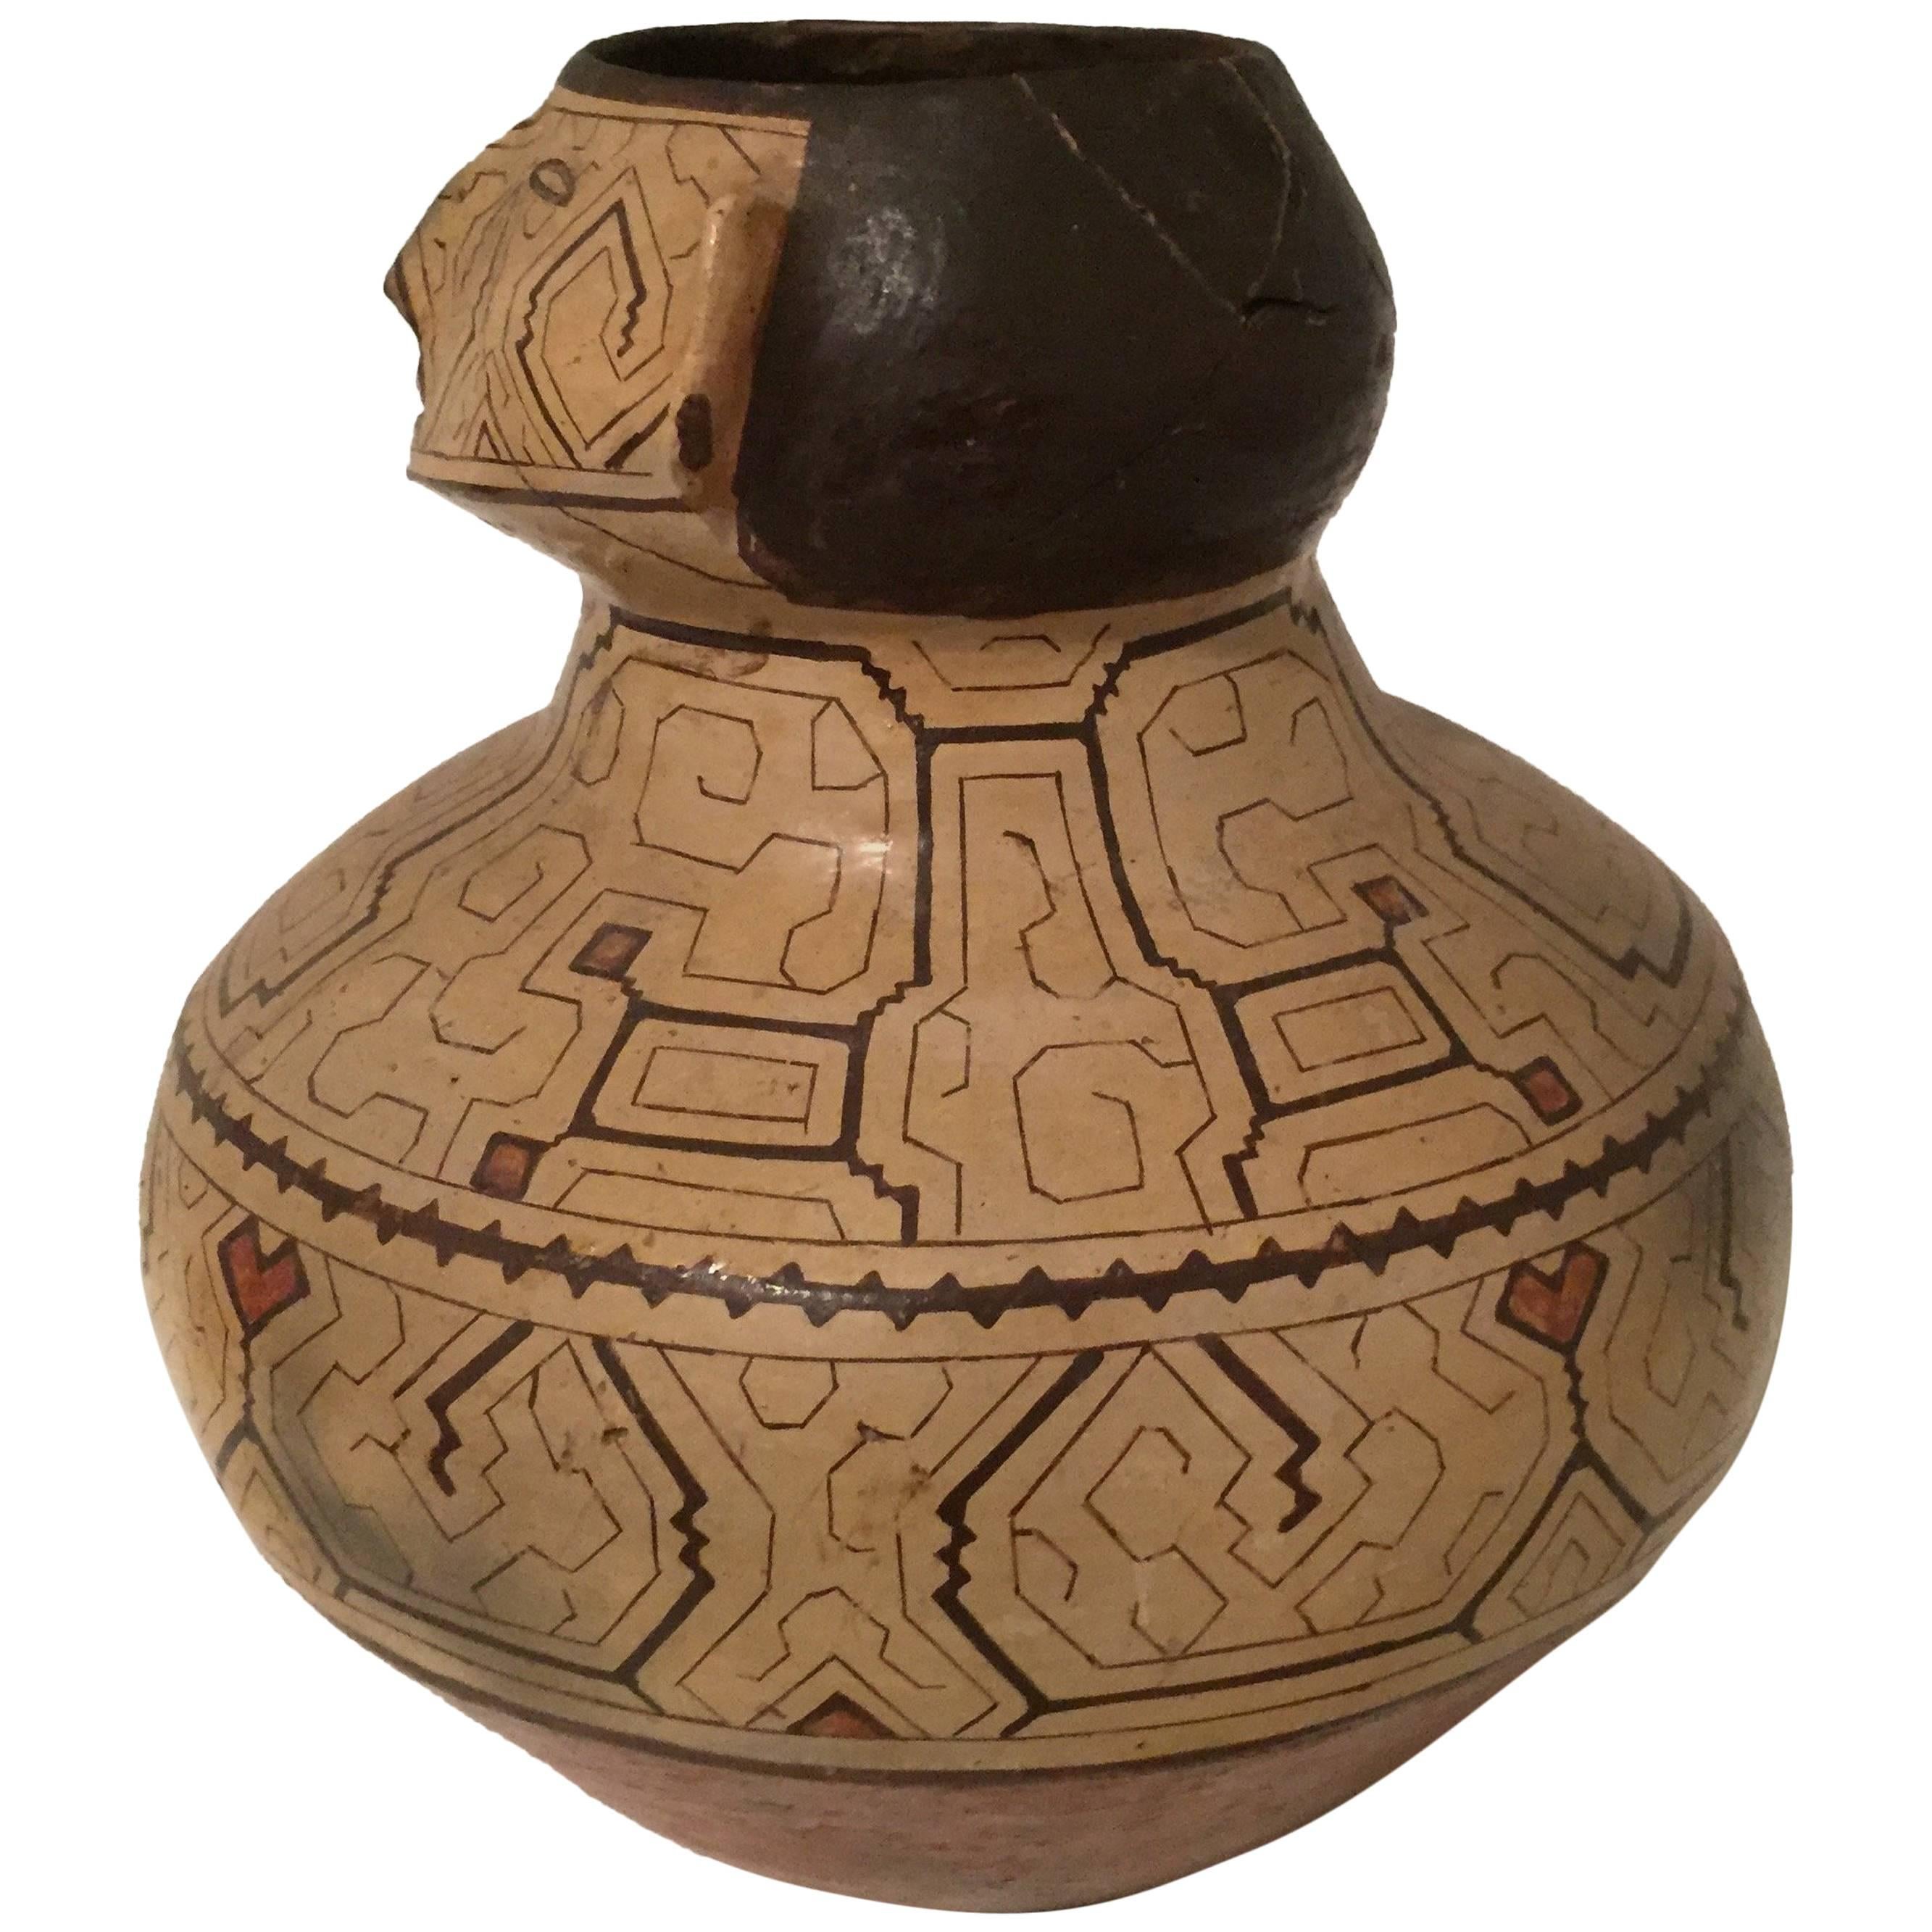  Offered by J R Richards
Shipibo pottery urn or vessel. Nicely sculpted face at neck with a well rounded body. General staining consistent with age and tribal use, Peru, early to mid-20th century.
12